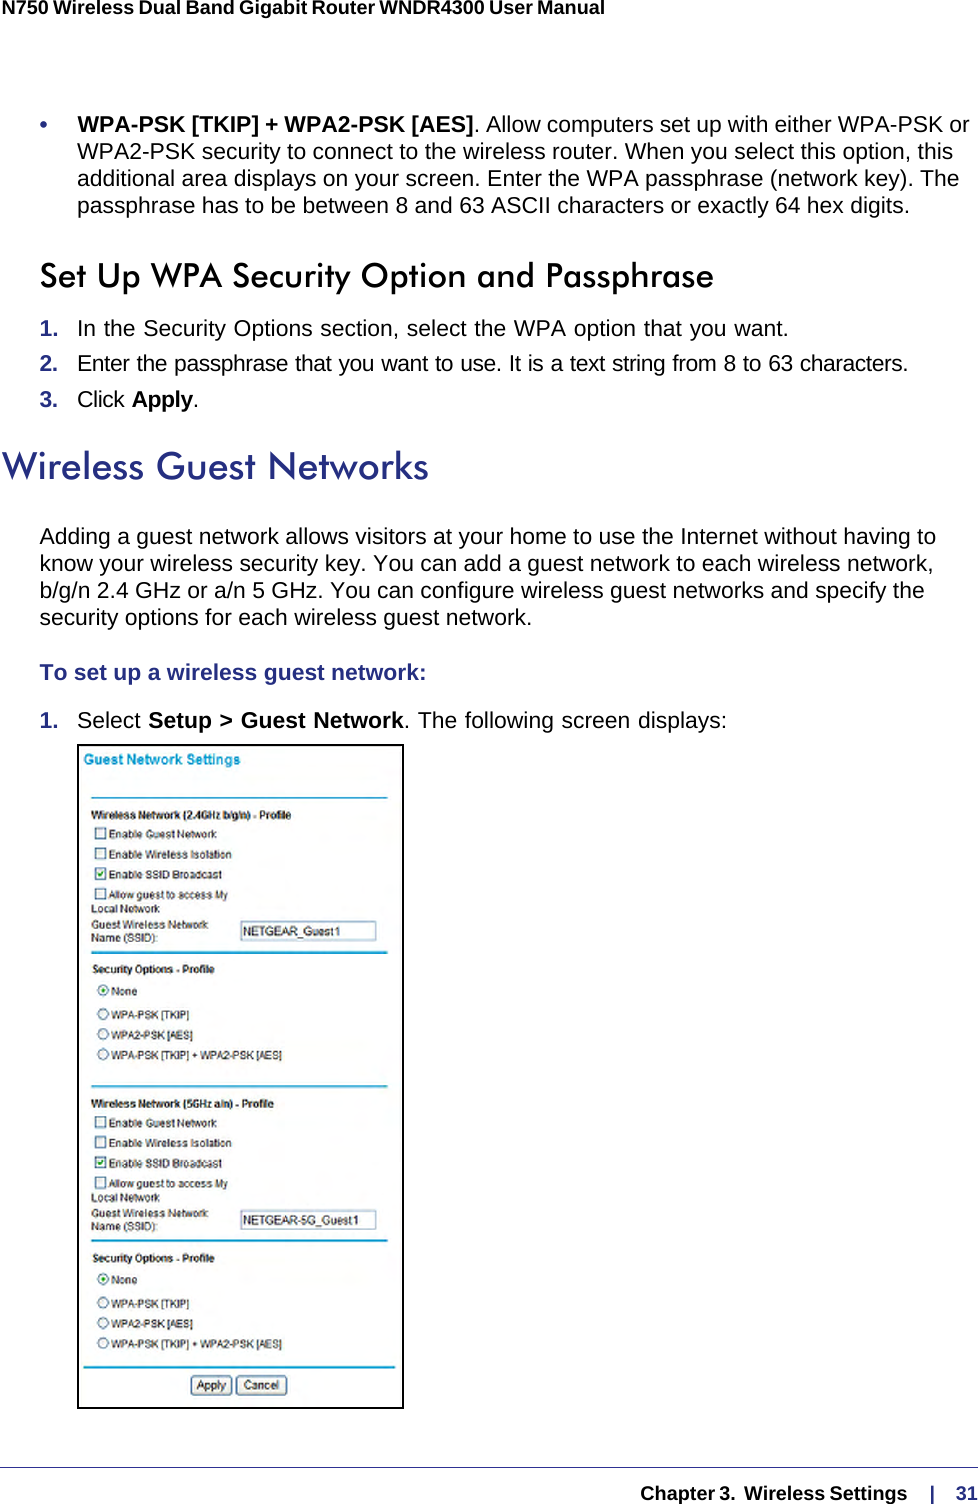   Chapter 3.  Wireless Settings     |    31N750 Wireless Dual Band Gigabit Router WNDR4300 User Manual •     WPA-PSK [TKIP] + WPA2-PSK [AES]. Allow computers set up with either WPA-PSK or WPA2-PSK security to connect to the wireless router. When you select this option, this additional area displays on your screen. Enter the WPA passphrase (network key). The passphrase has to be between 8 and 63 ASCII characters or exactly 64 hex digits.Set Up WPA Security Option and Passphrase1.  In the Security Options section, select the WPA option that you want.2.  Enter the passphrase that you want to use. It is a text string from 8 to 63 characters.3.  Click Apply.Wireless Guest NetworksAdding a guest network allows visitors at your home to use the Internet without having to know your wireless security key. You can add a guest network to each wireless network, b/g/n 2.4 GHz or a/n 5 GHz. You can configure wireless guest networks and specify the security options for each wireless guest network. To set up a wireless guest network:1.  Select Setup &gt; Guest Network. The following screen displays: